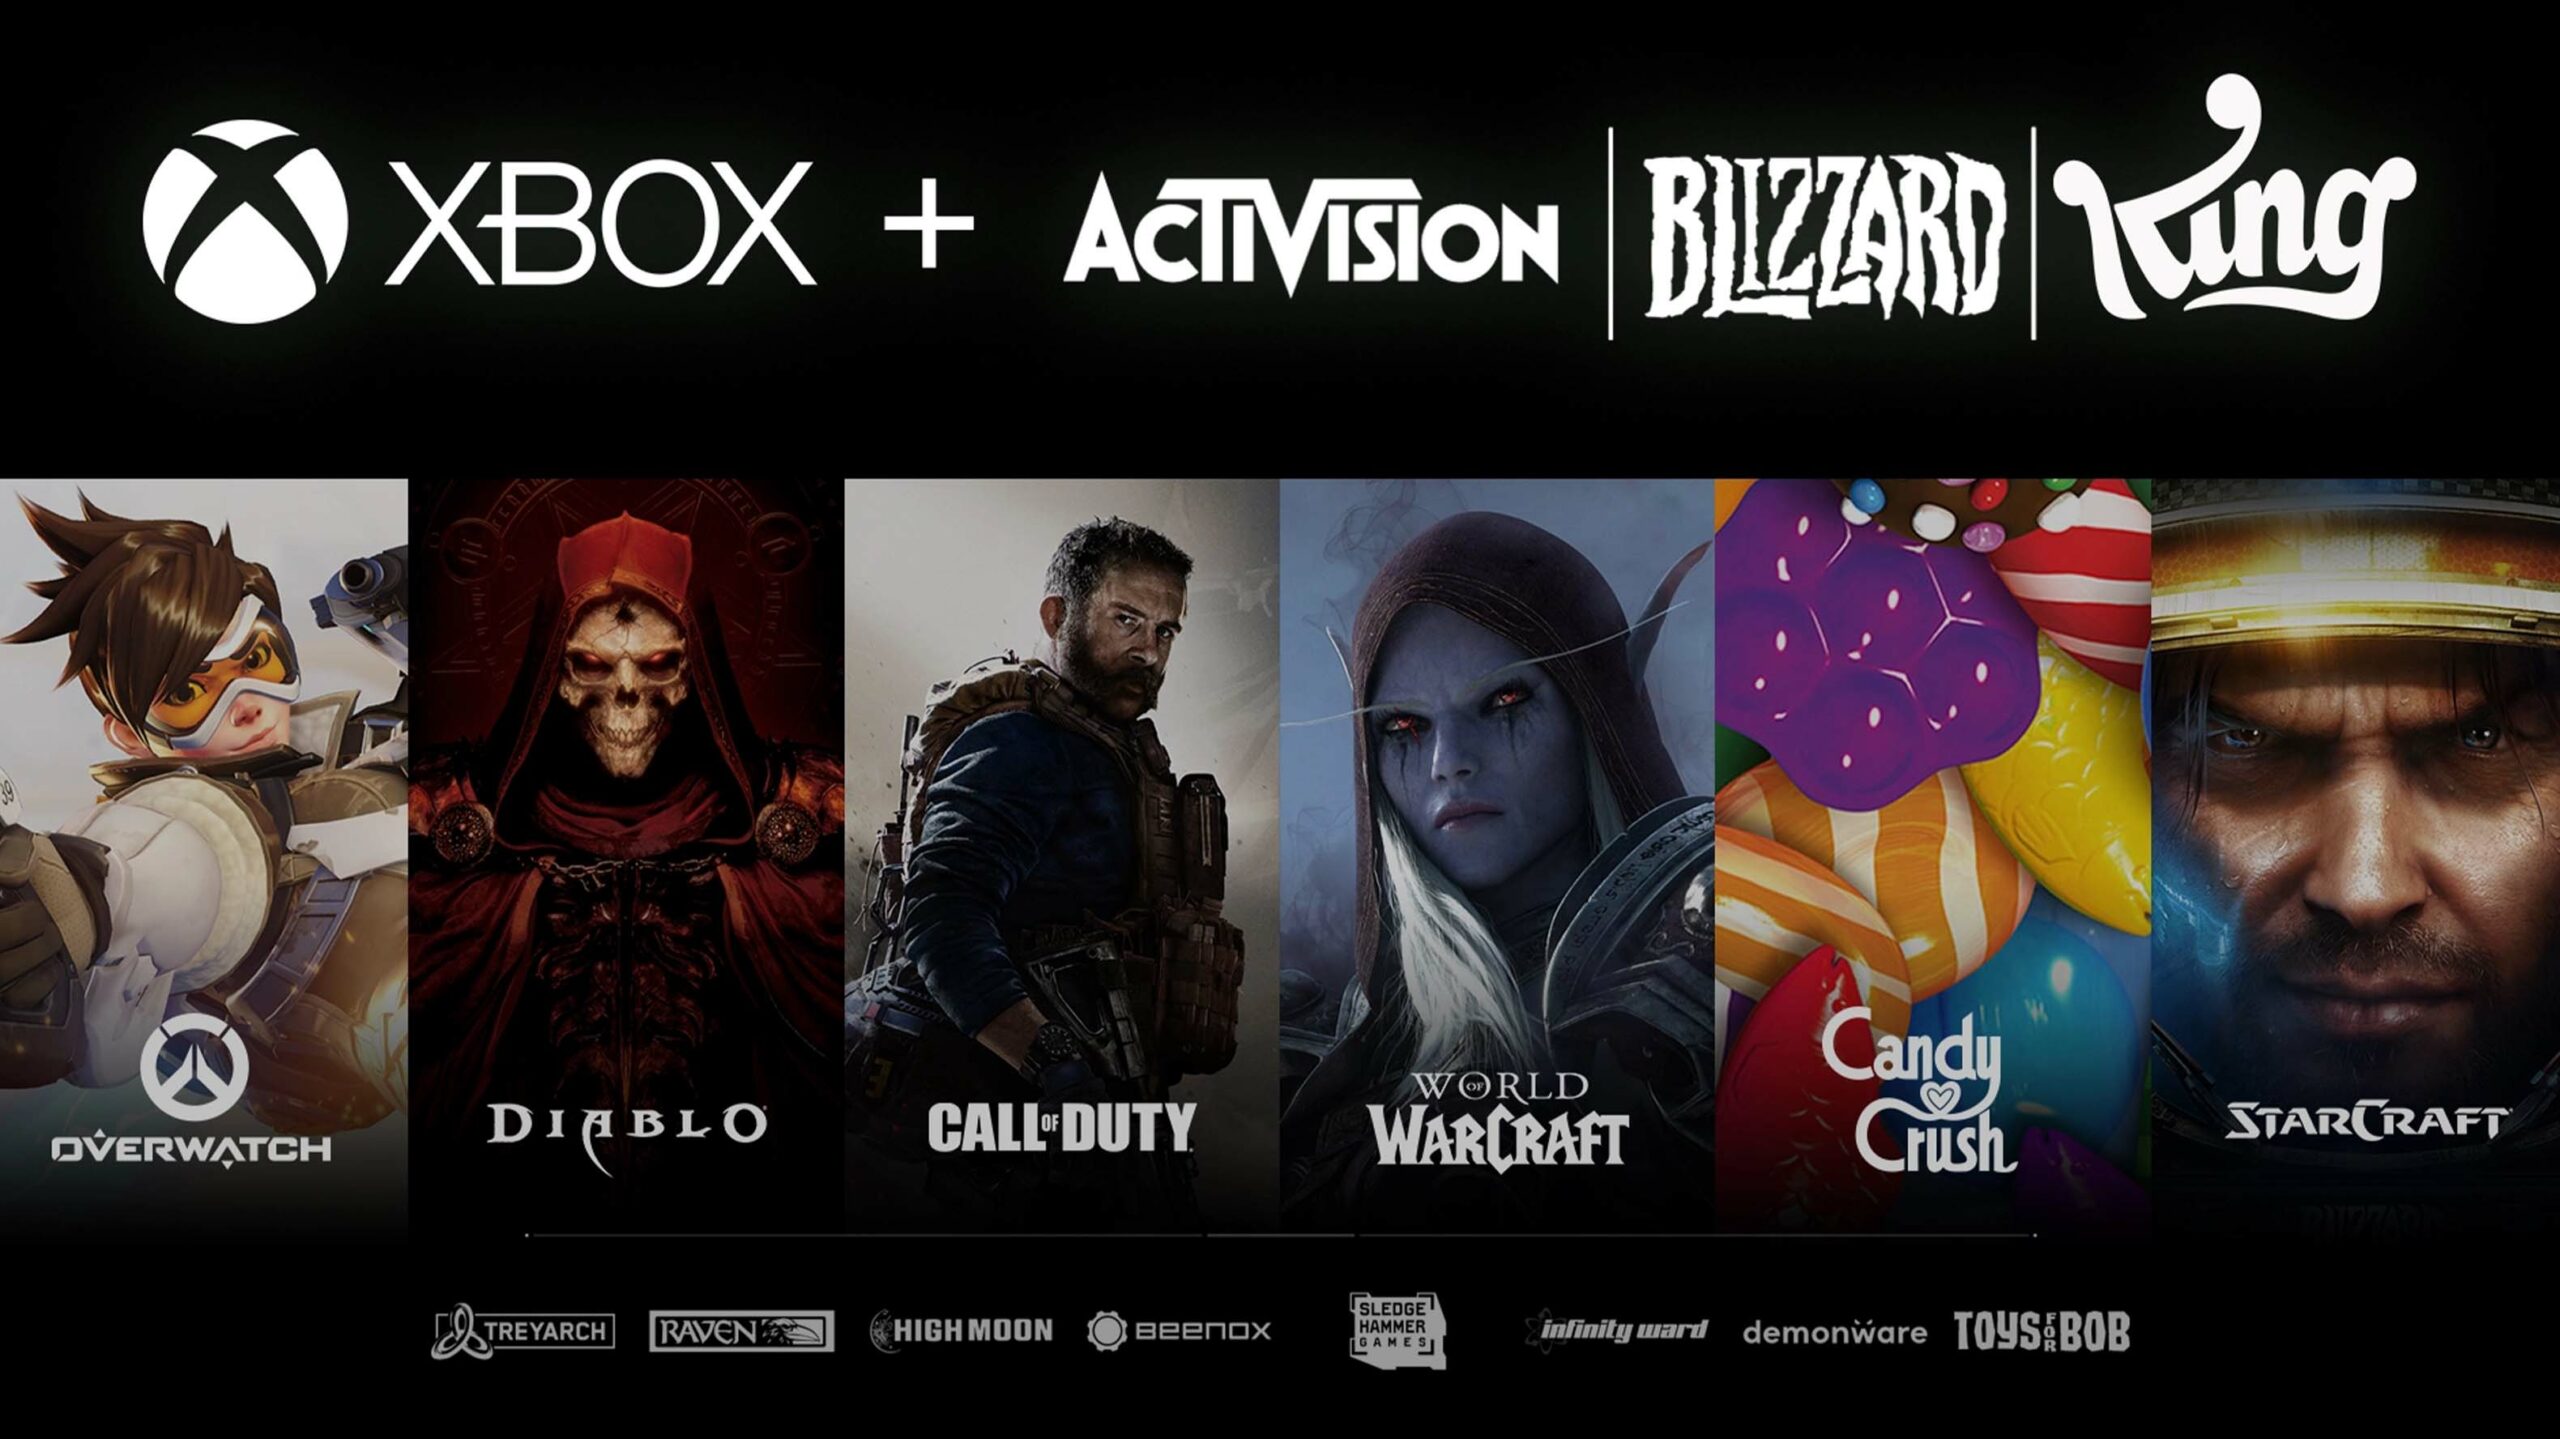 Microsoft Activision deal